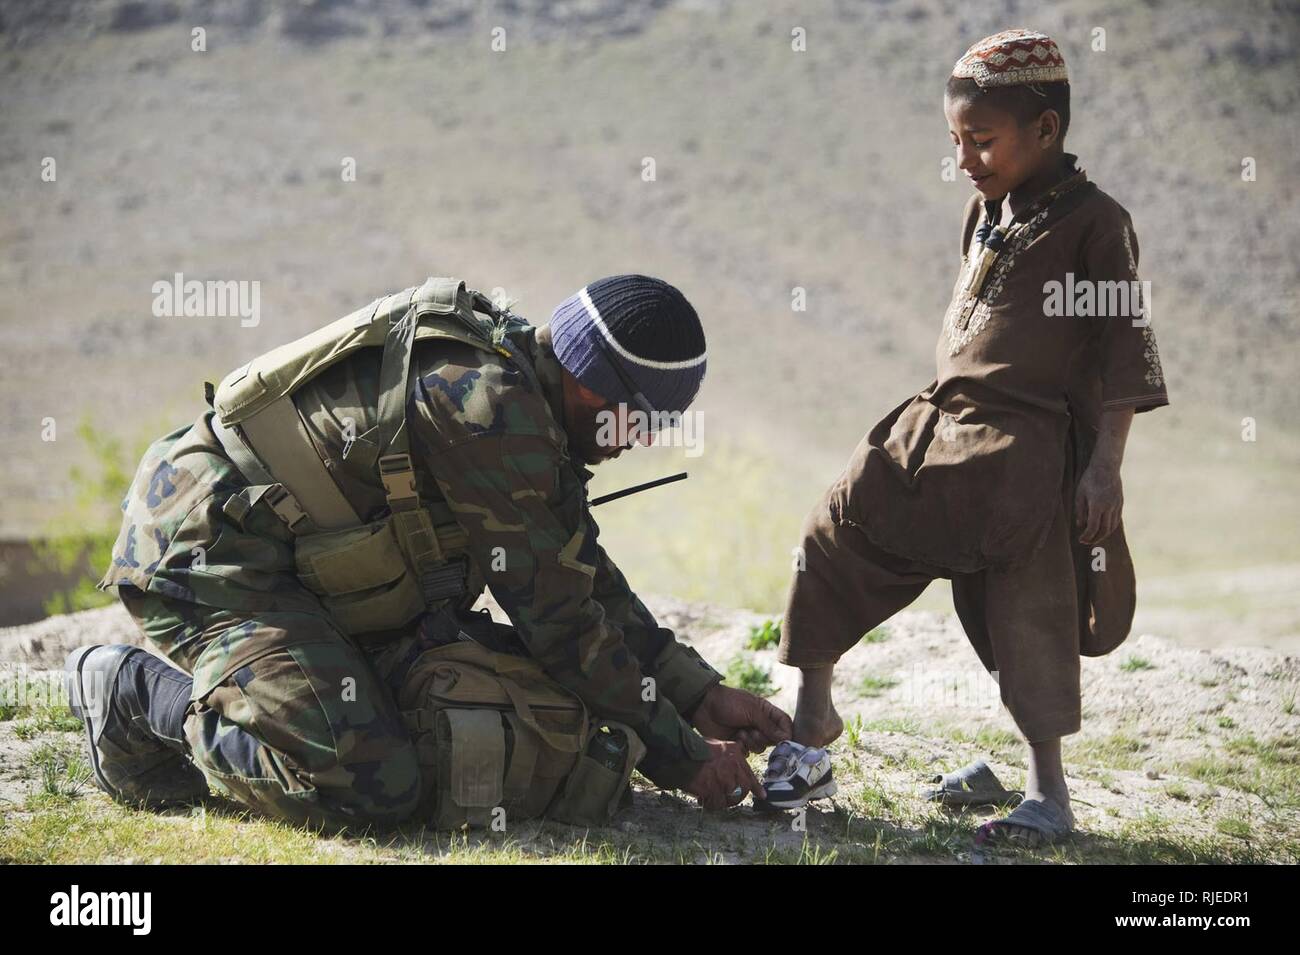 An Afghan National Army special forces soldier helps a boy try on a new  pair of shoes in Tagaw district, Uruzgan province, Afghanistan, April 14.  The soldier gave the boy the shoes